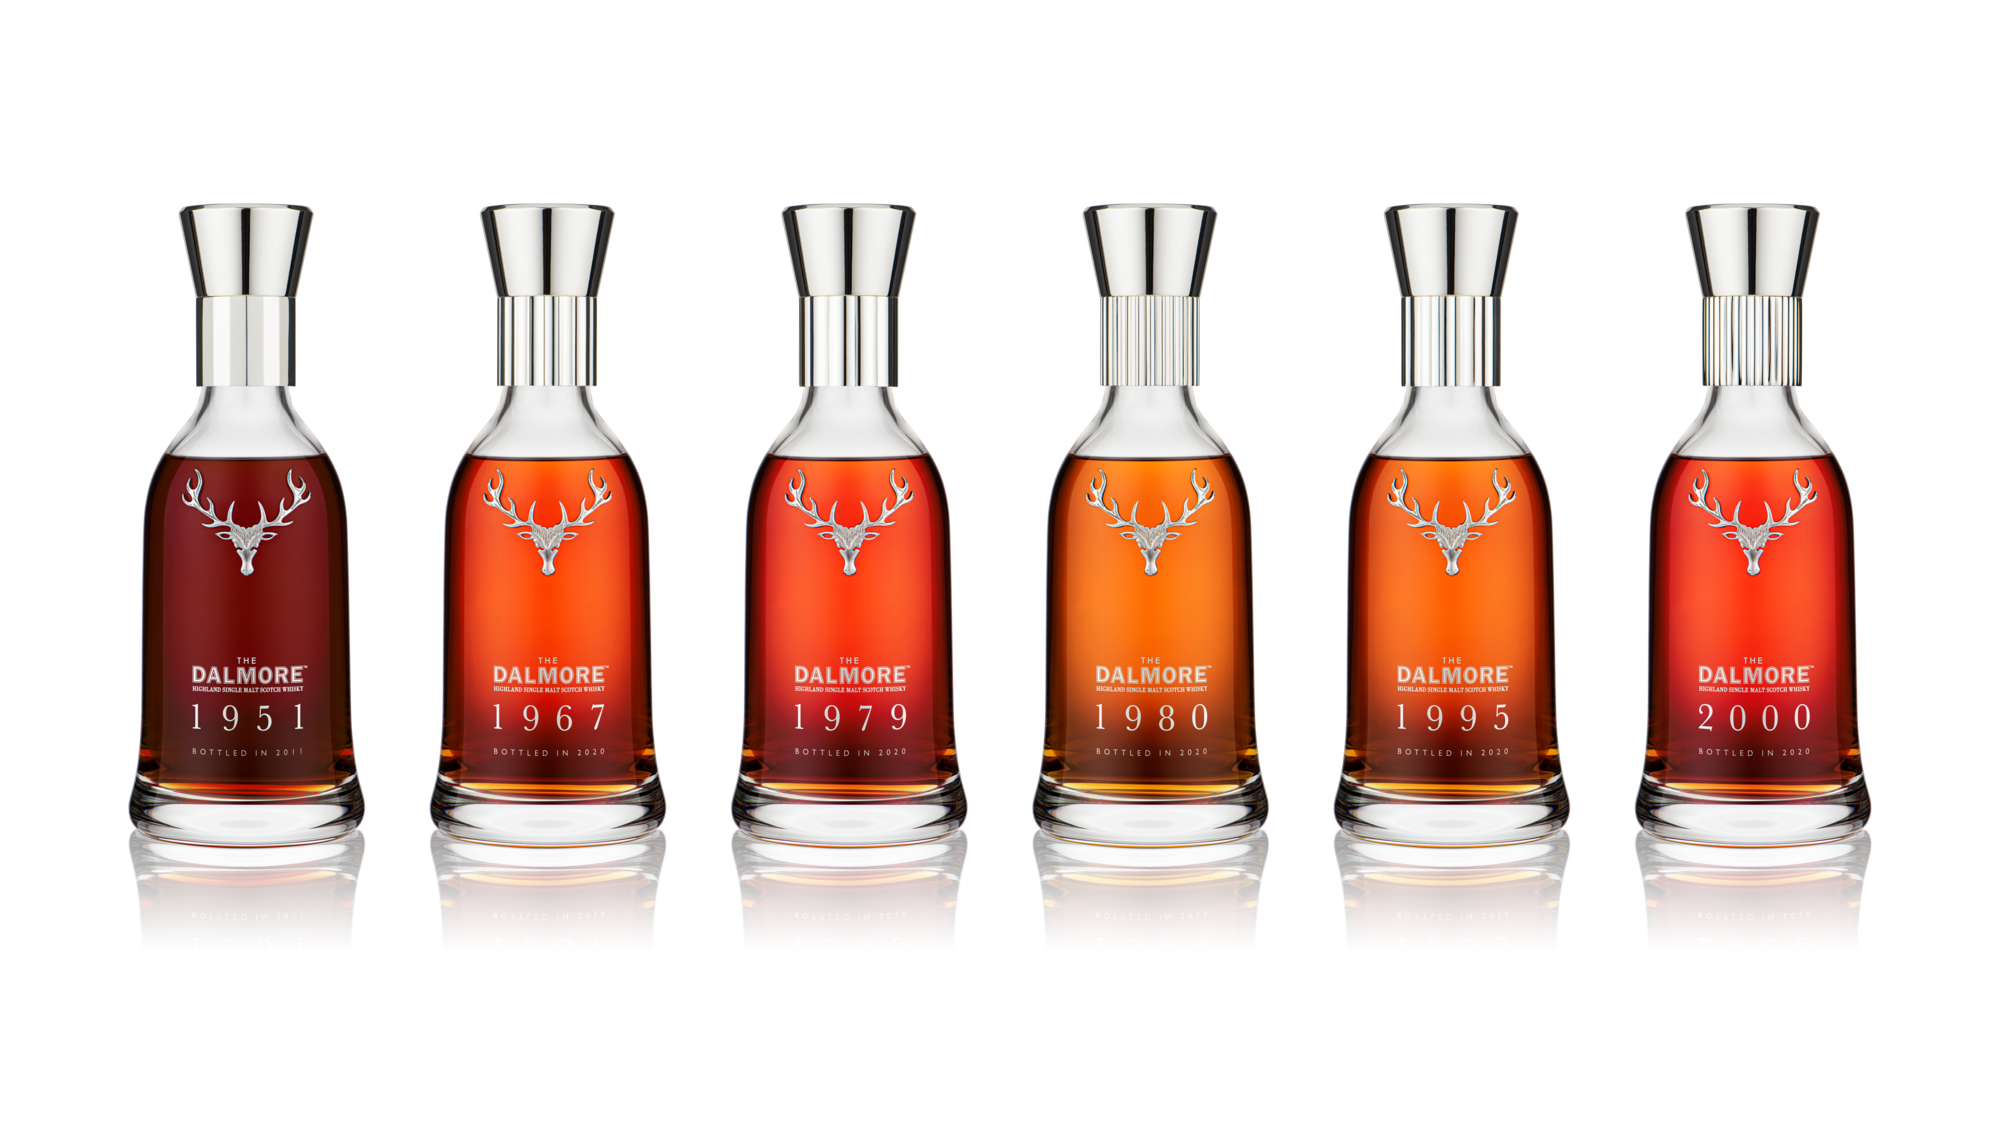 The Dalmore Decades whisky bottles - News